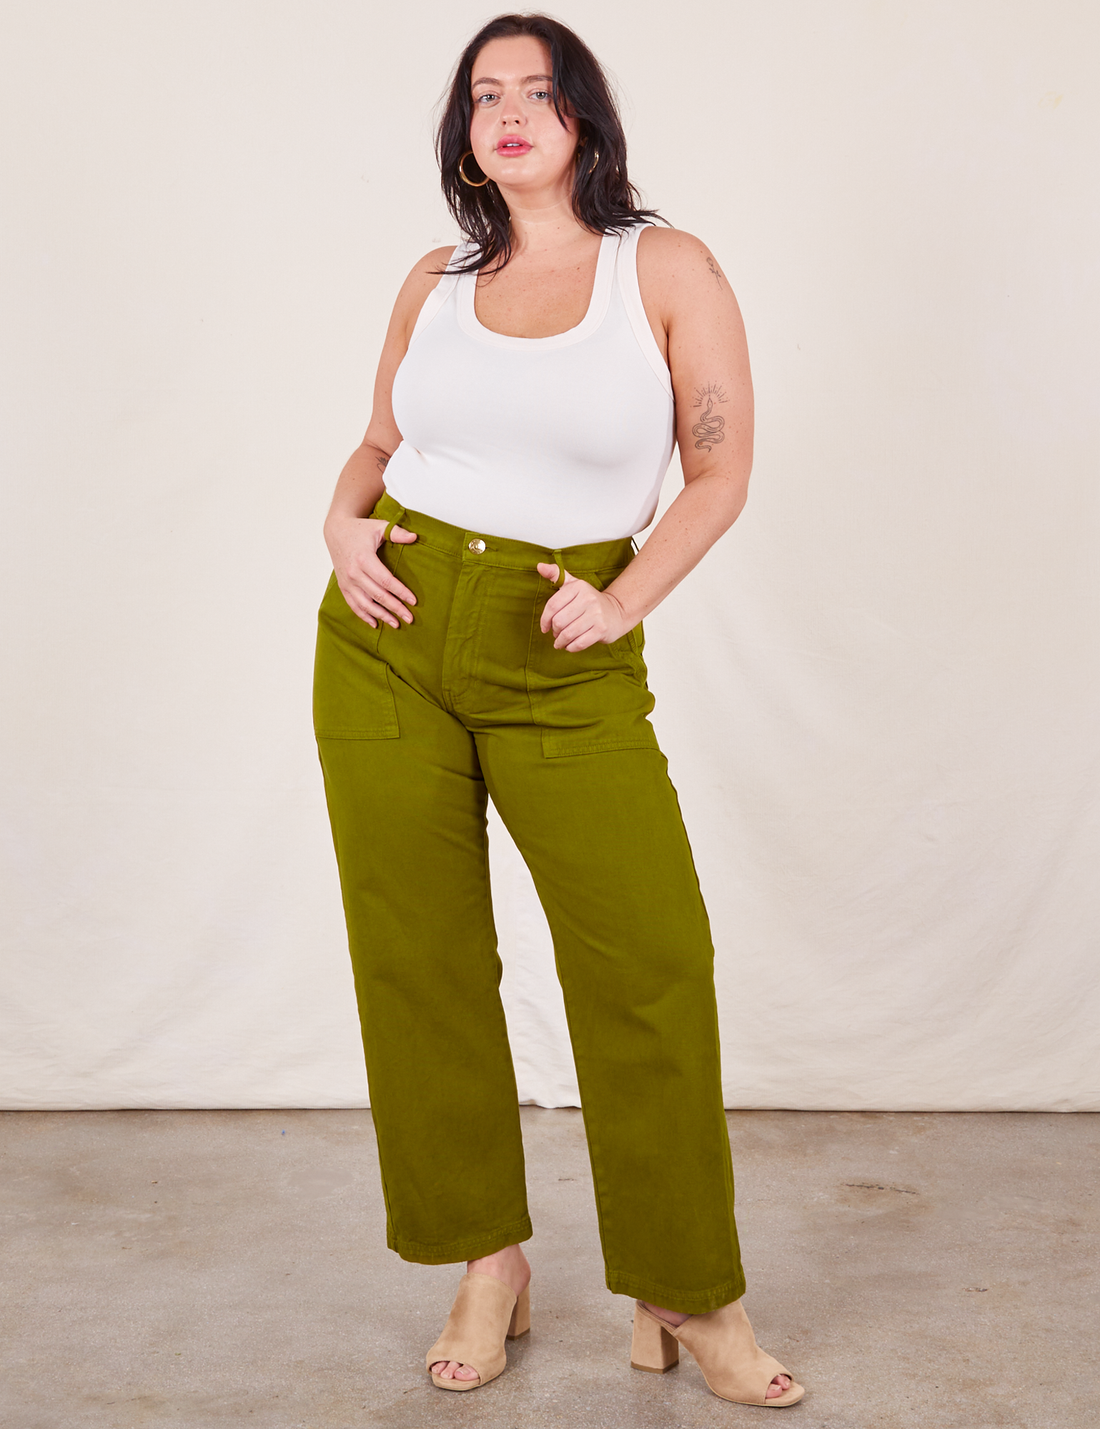 Work Pants in Olive Green on Faye wearing vintage off-white Tank Top